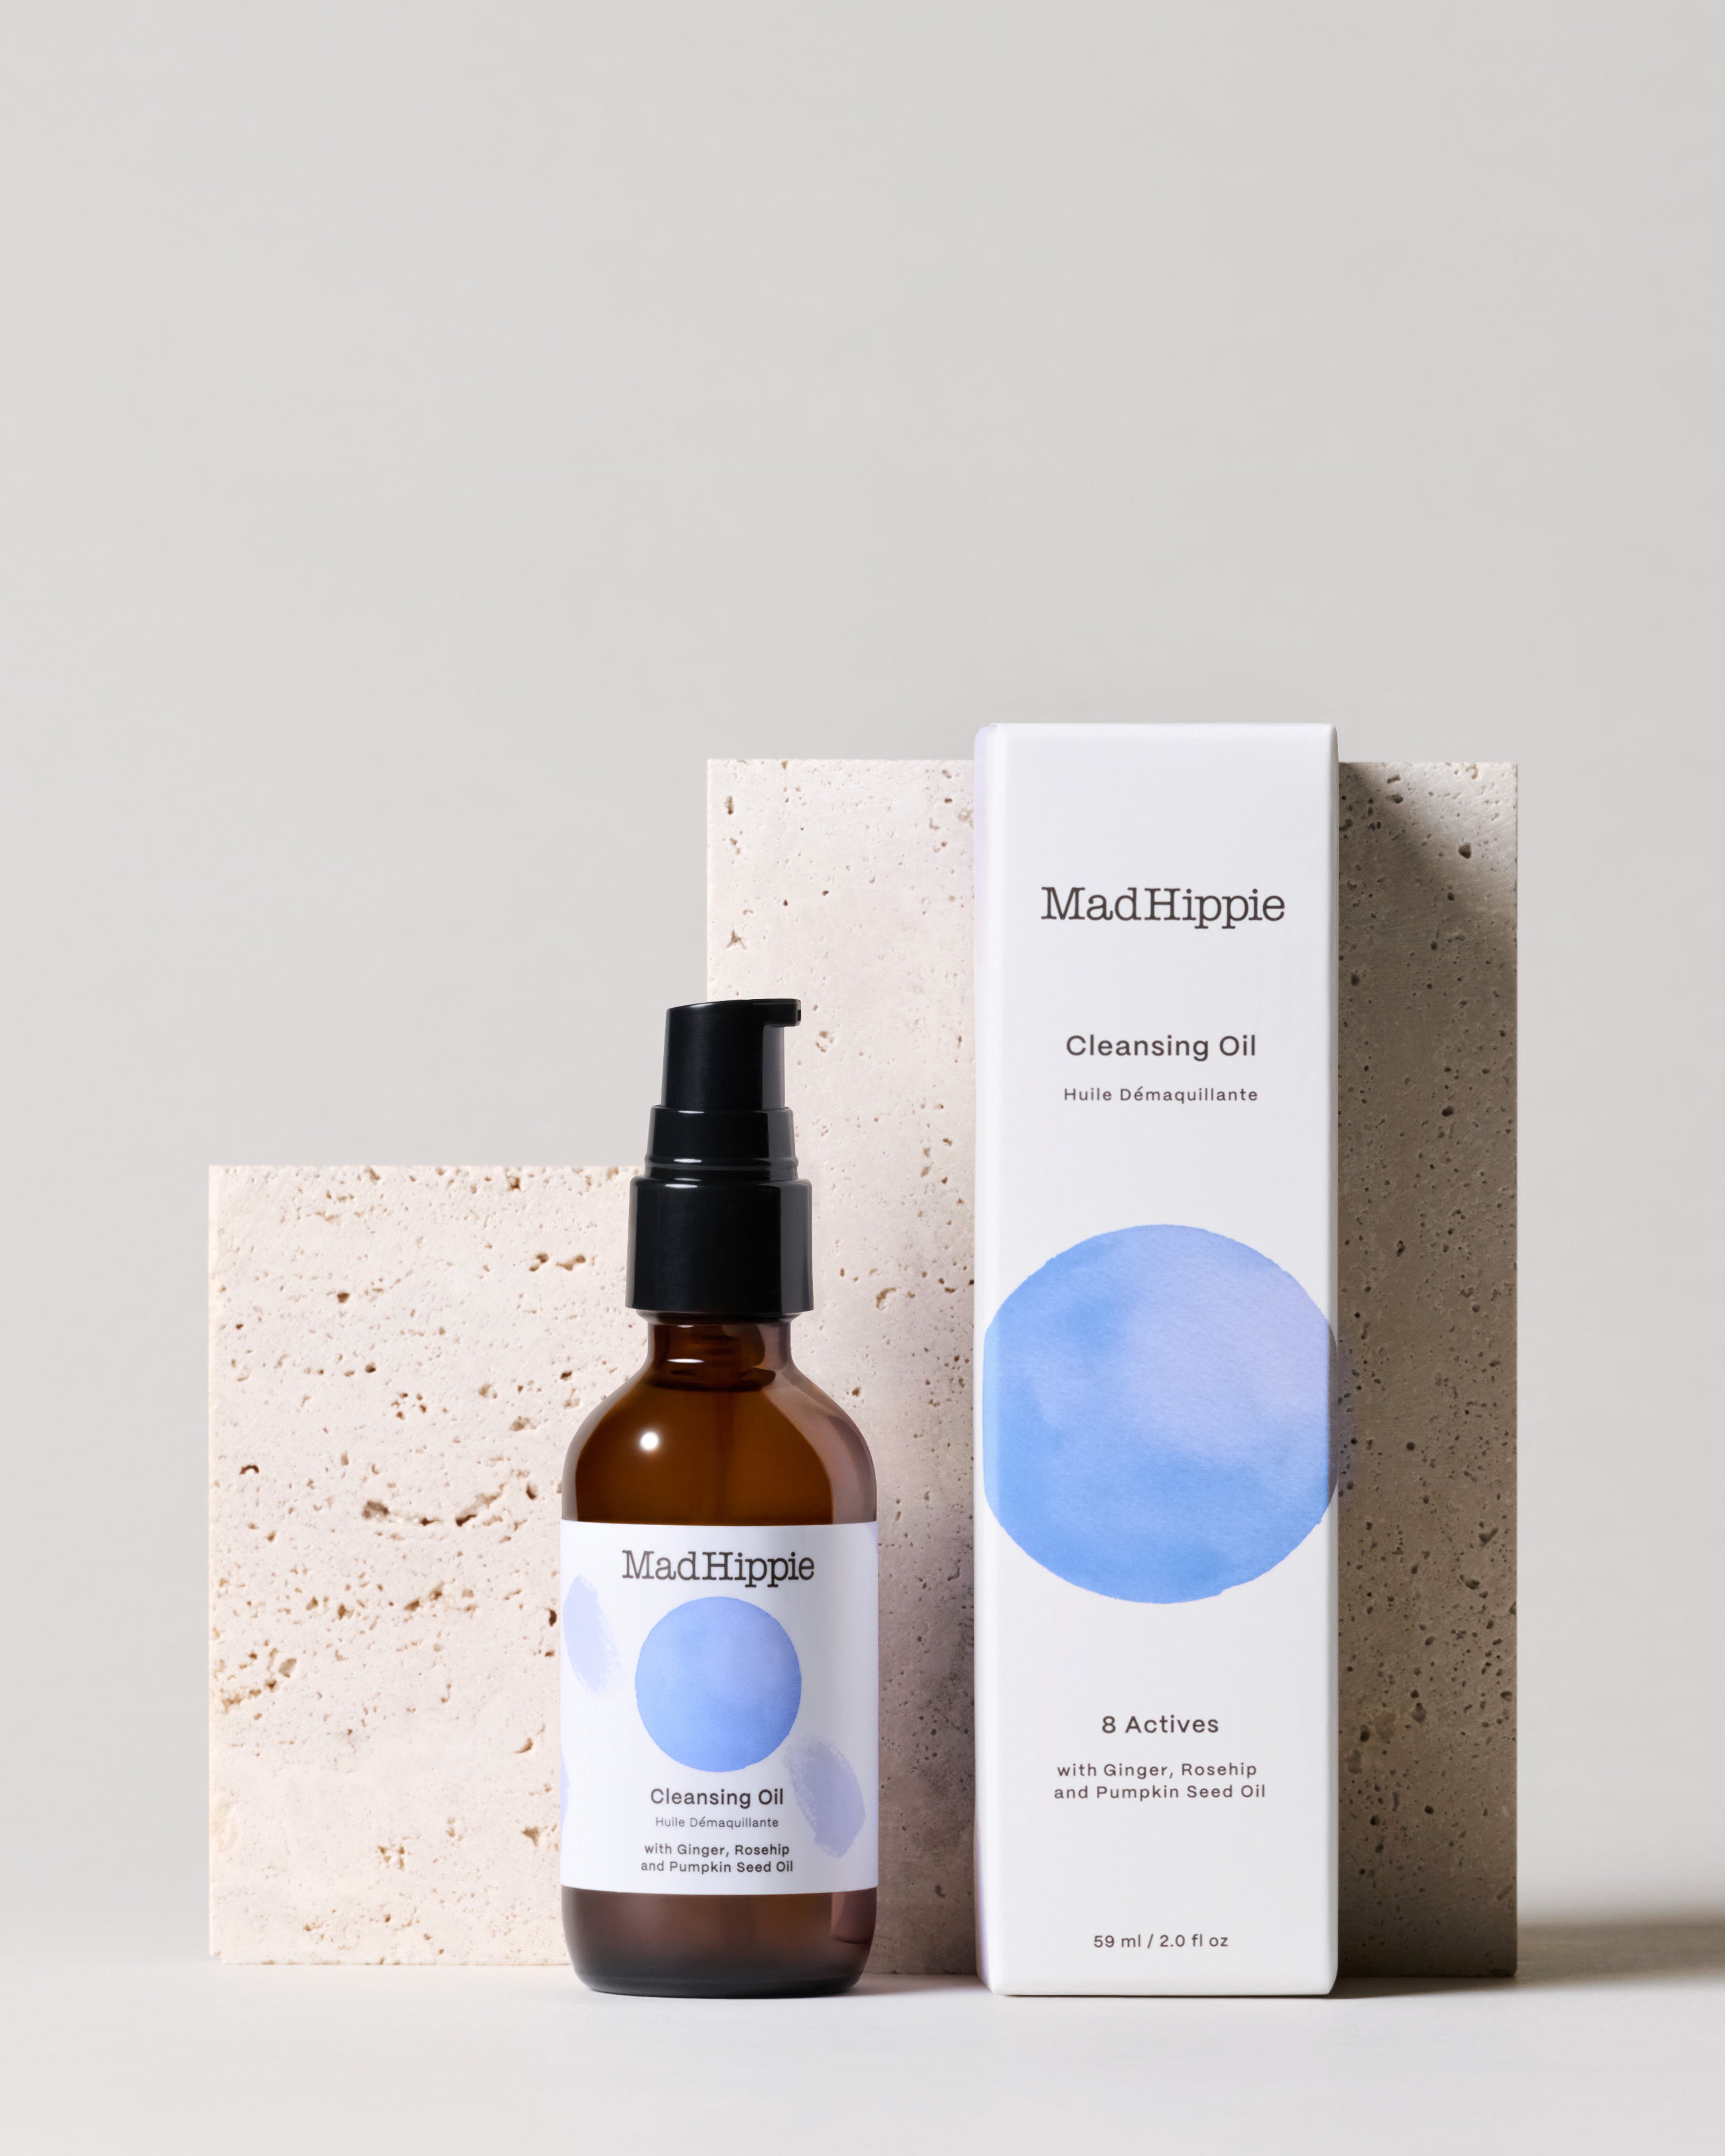 Cleansing Oil bottle + box in front of stone slab, with gray background